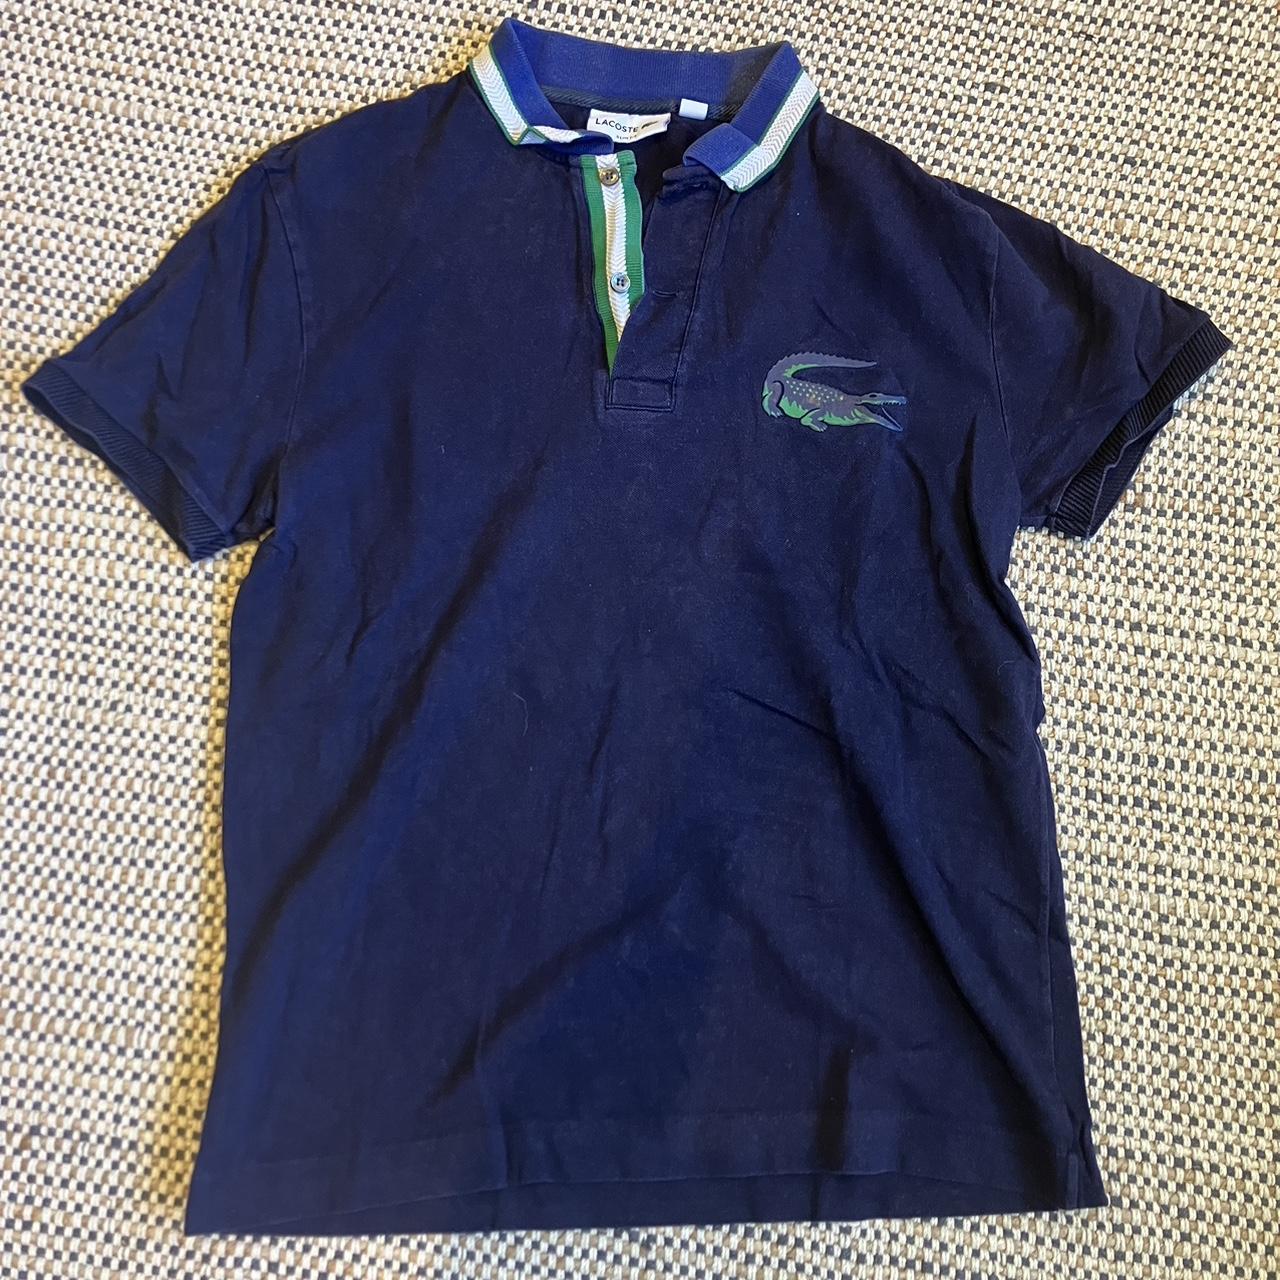 Navy polo shirt with green & white collar Great... - Depop